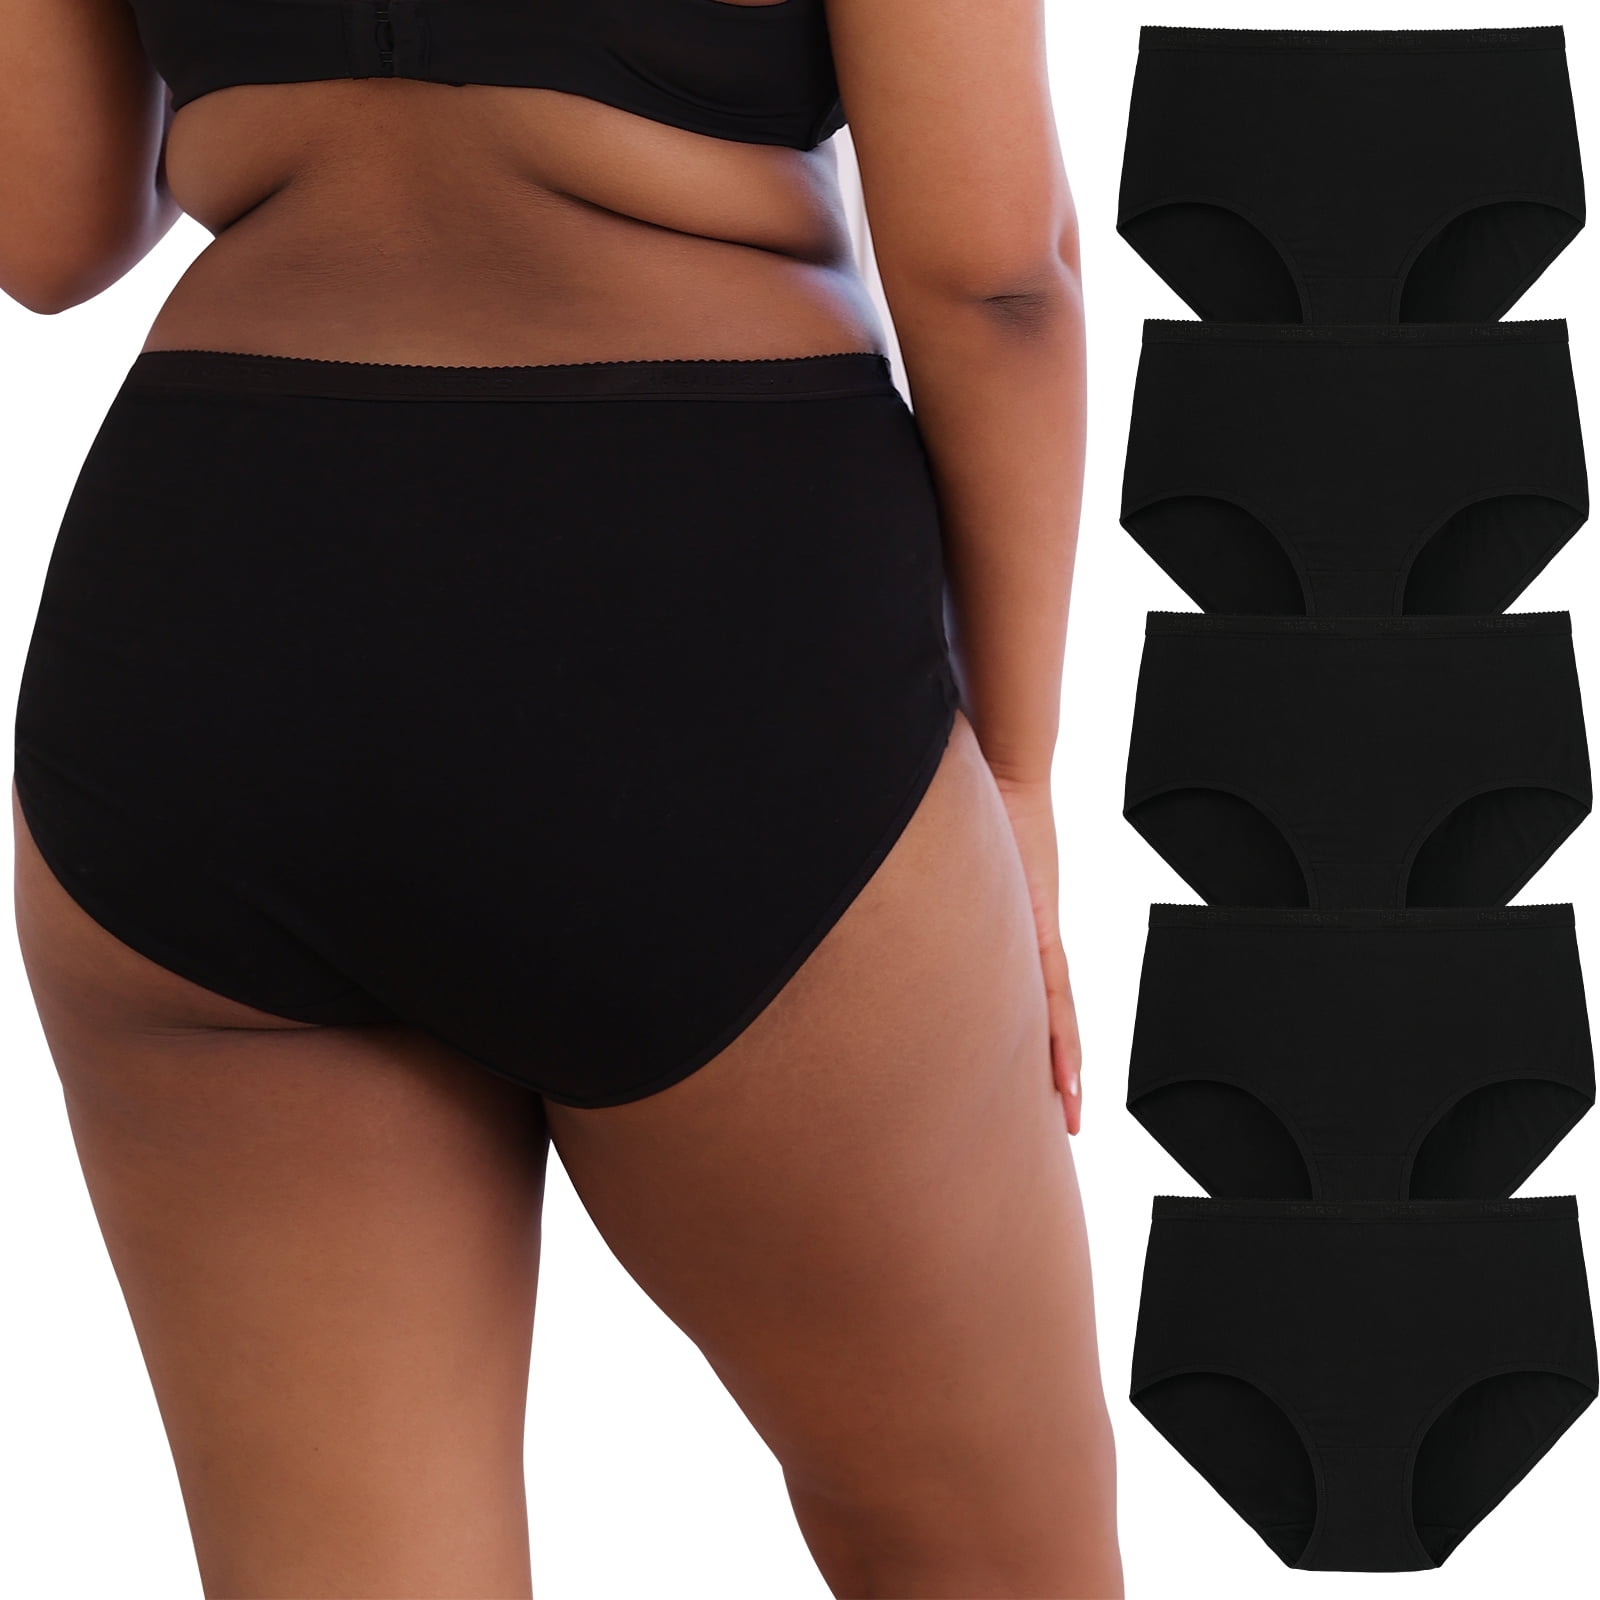 Women's High Waisted Cotton Underwear Soft Breathable Full Coverage Stretch  Briefs Ladies Panties 5-Pack, 6 Pack=black*6, S price in UAE,  UAE